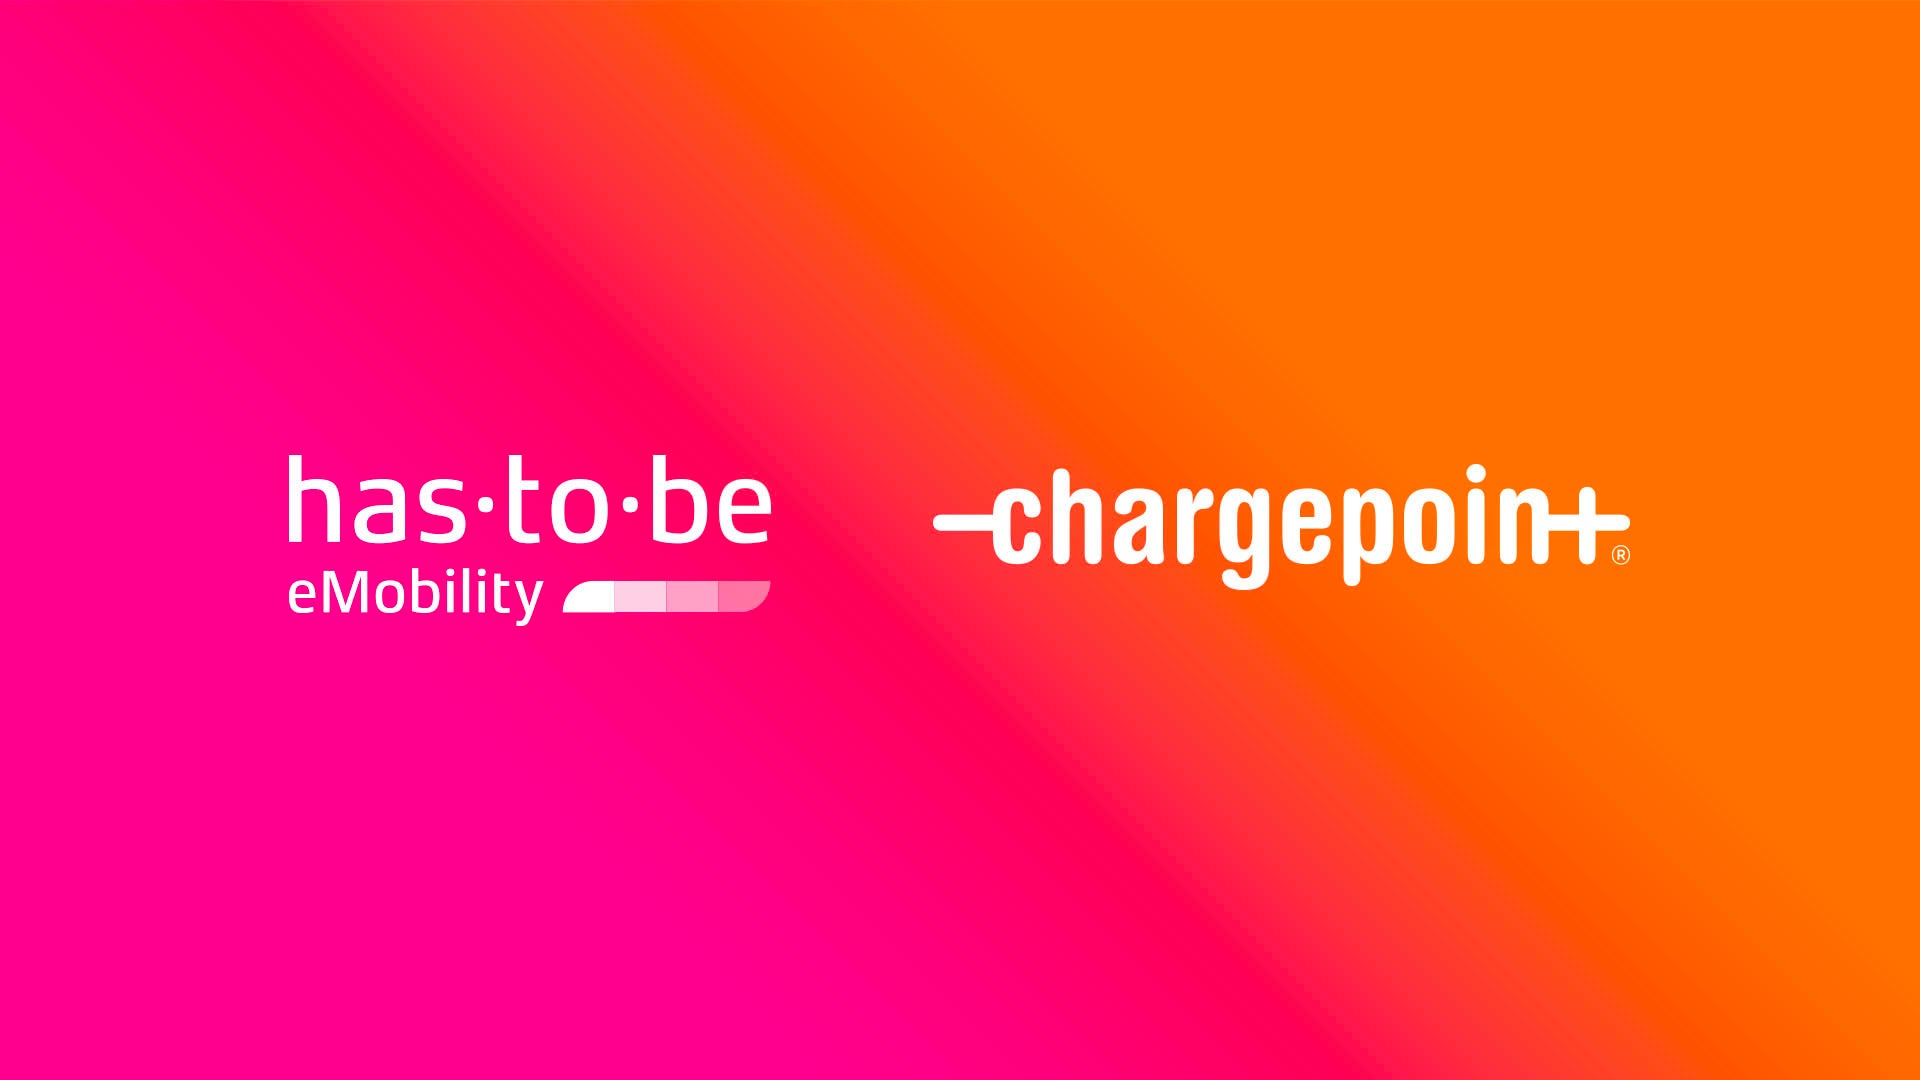 ChargePoint announces agreement to acquire leading European e-mobility technology provider has·to·be in transaction valued at €250 million